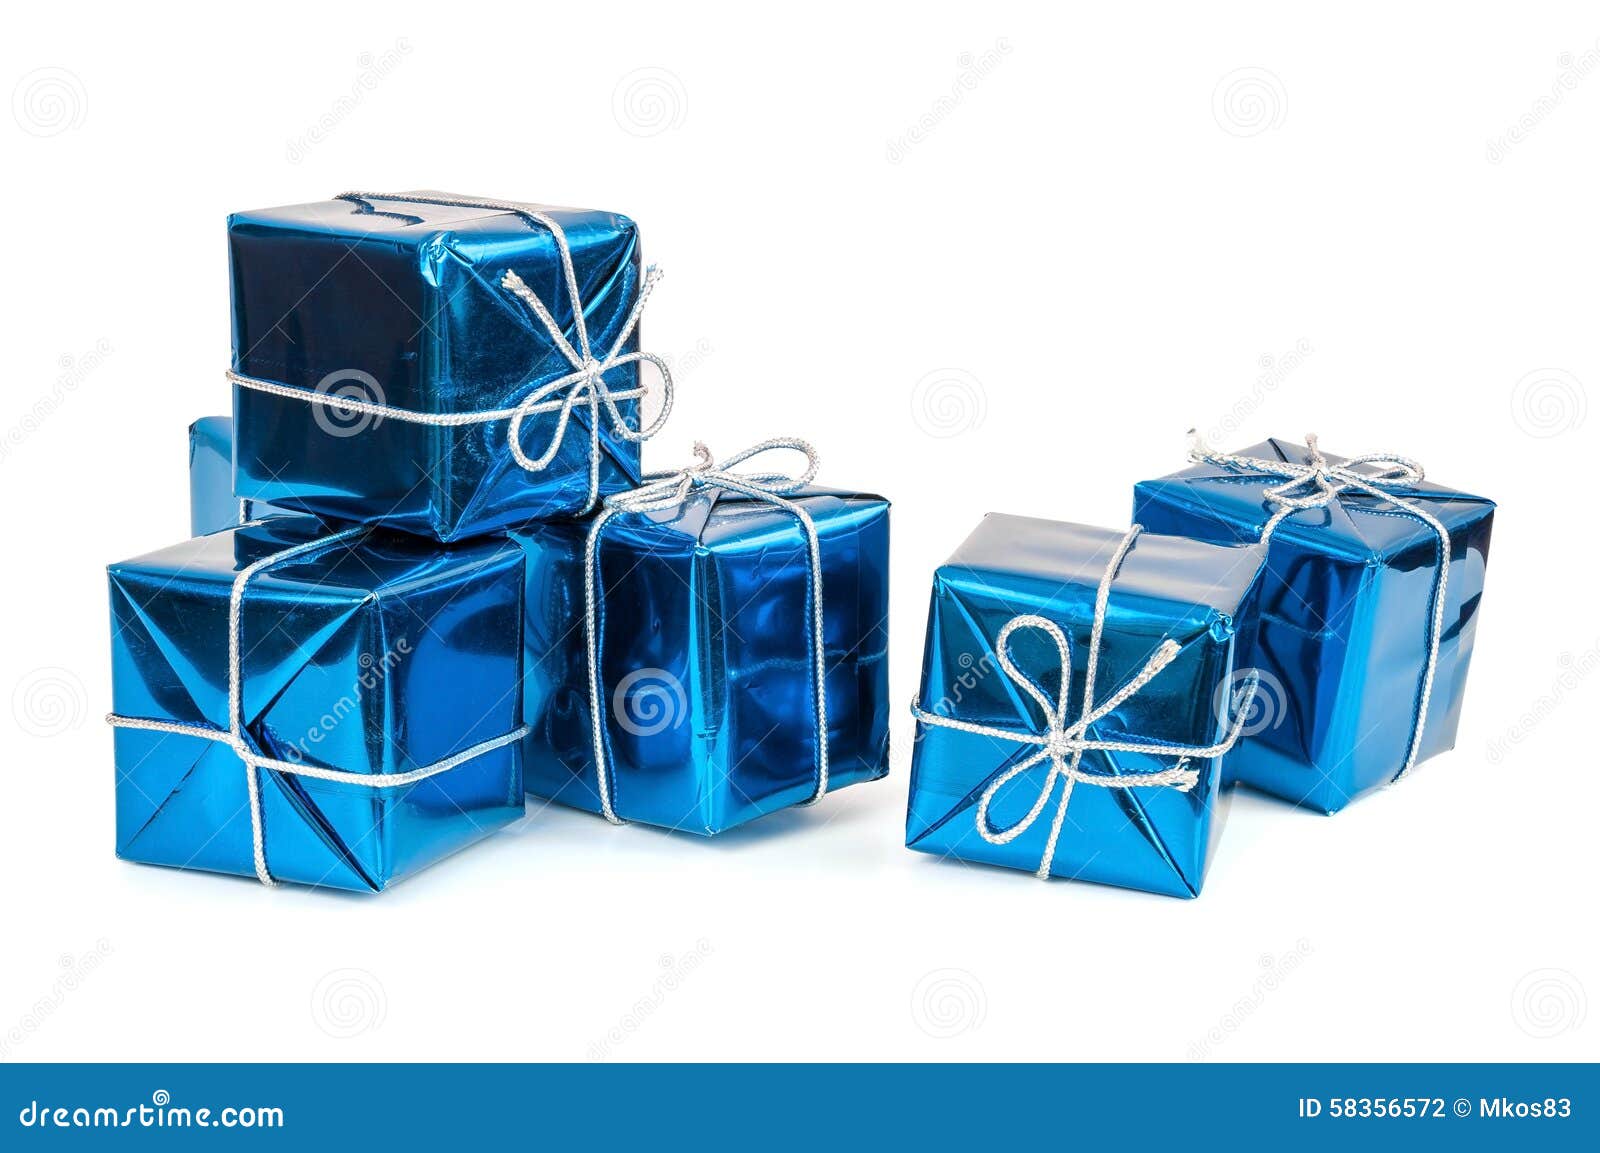 Group Of Blue Gift Boxes With Silver Ribbons Stock Photo - Image: 58356572